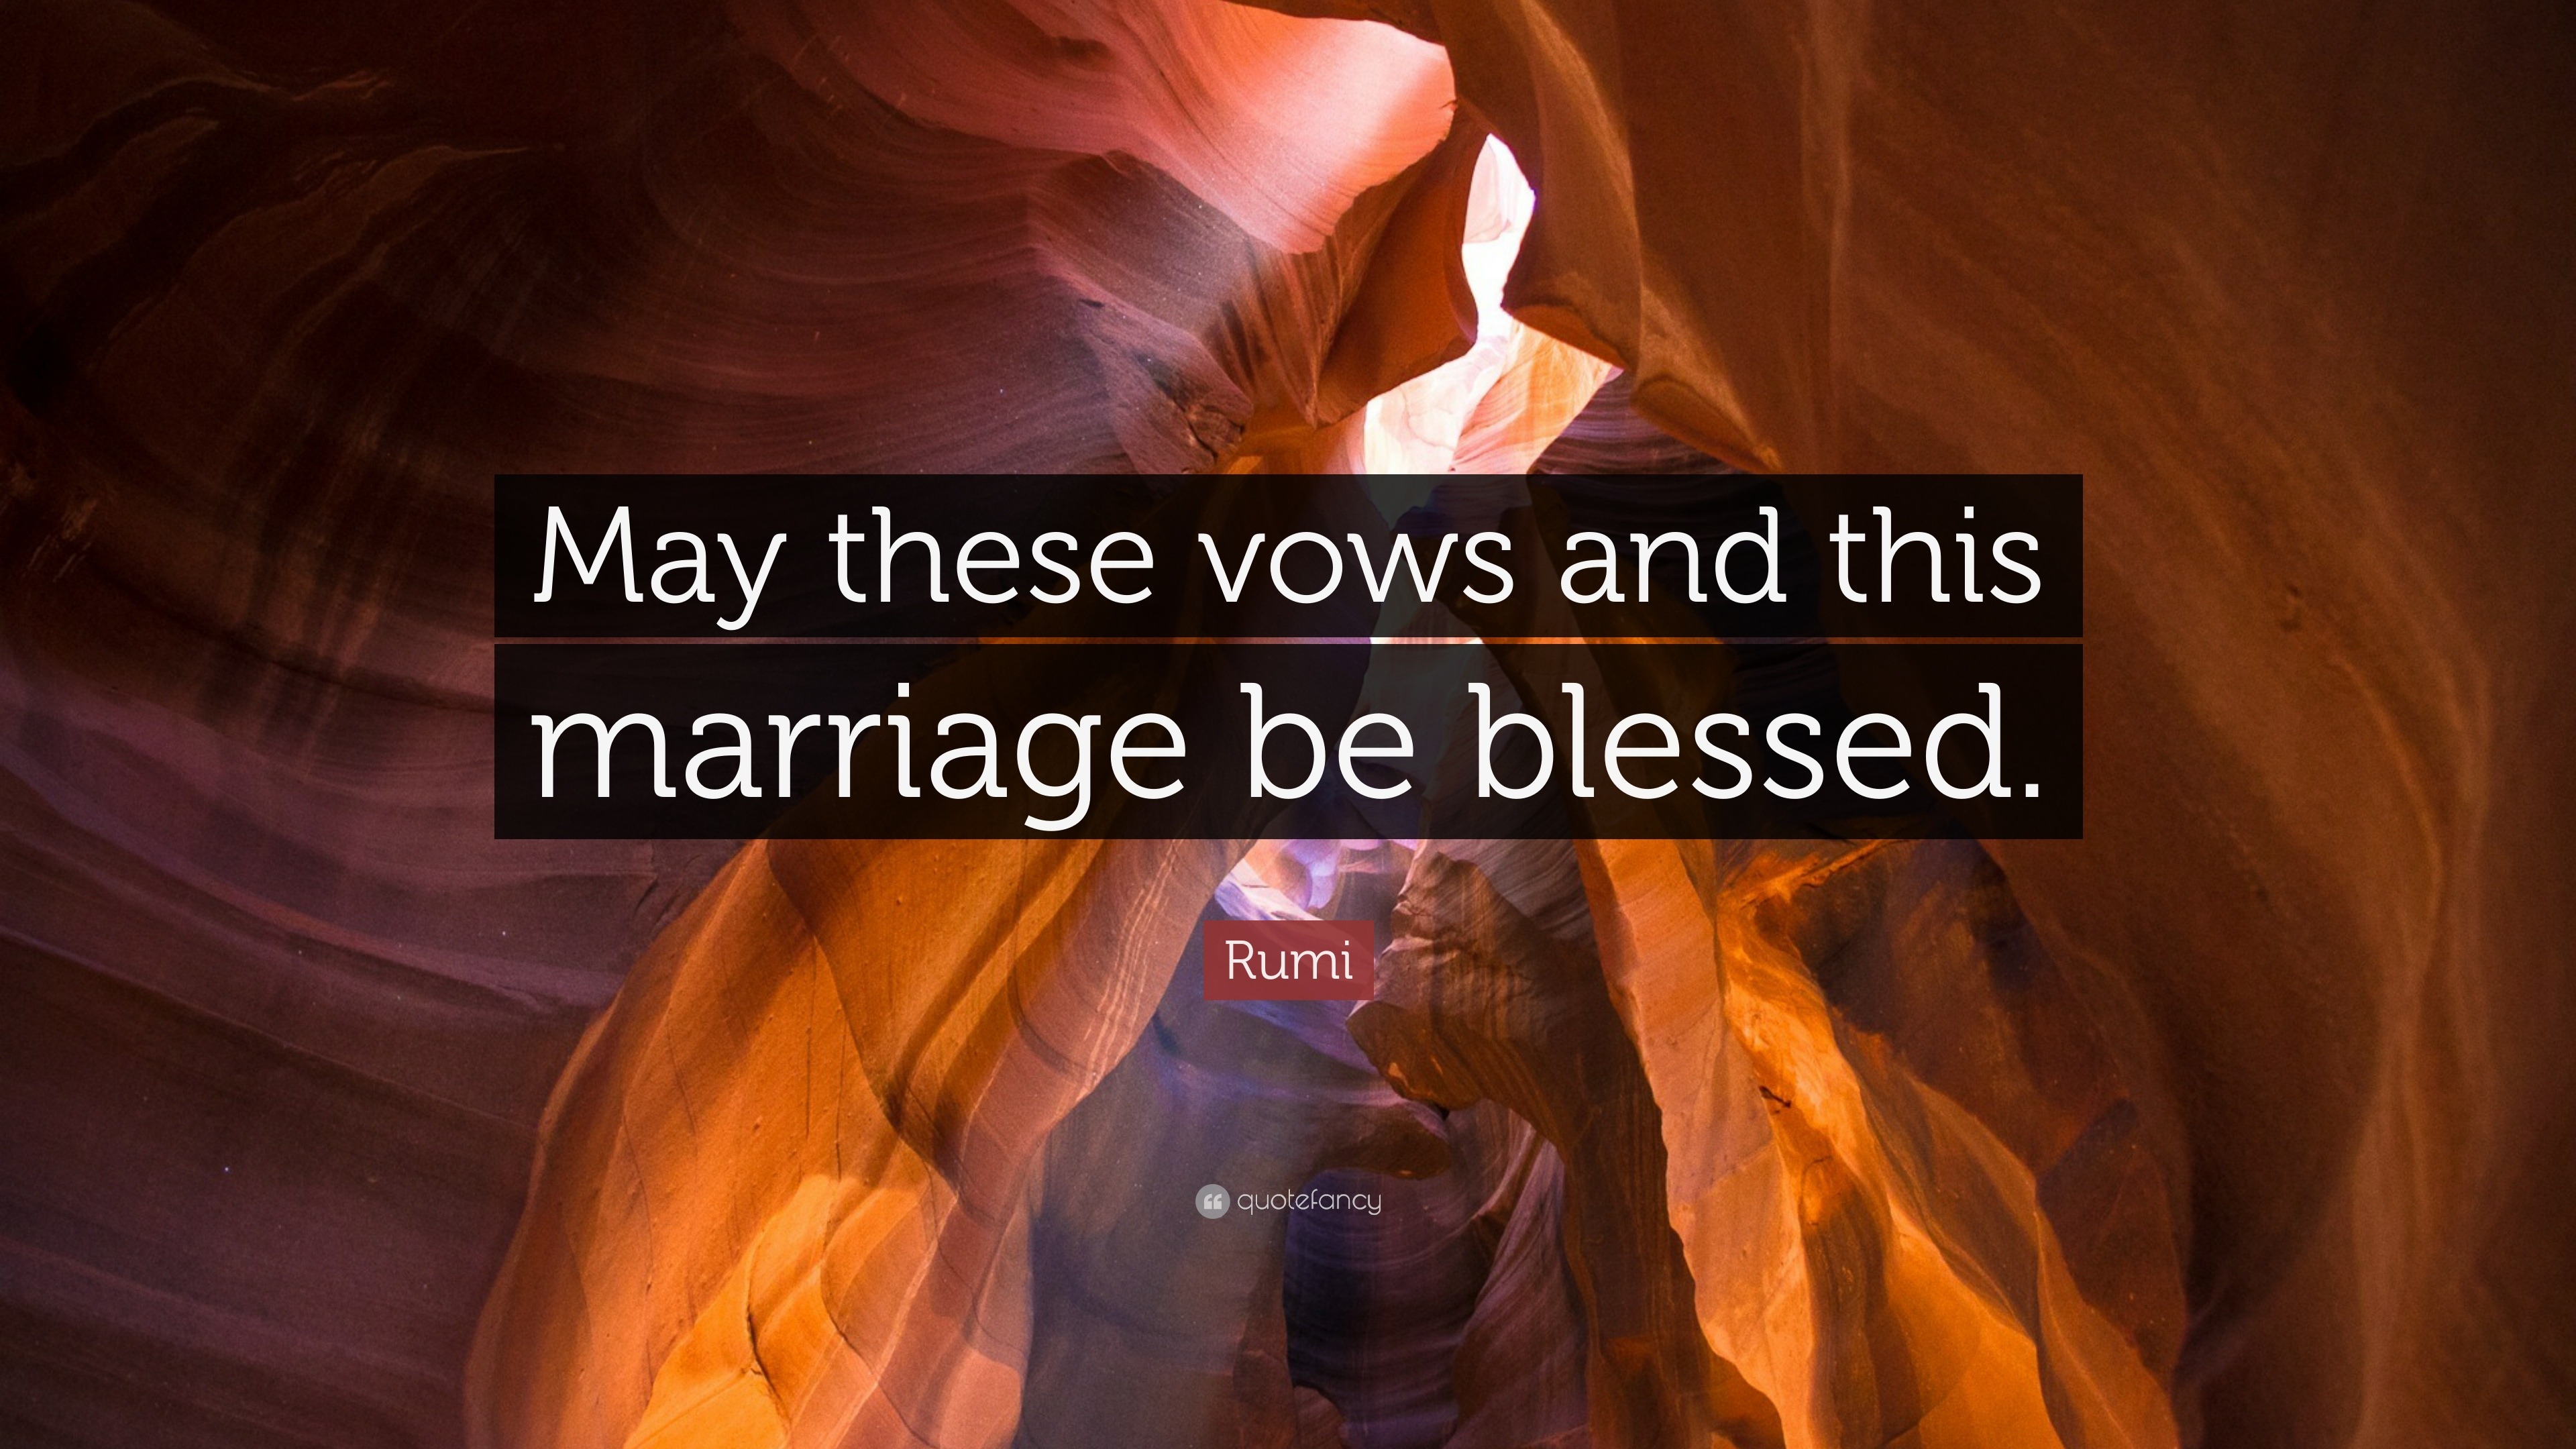 Rumi Quote “May these vows and this marriage be blessed.”